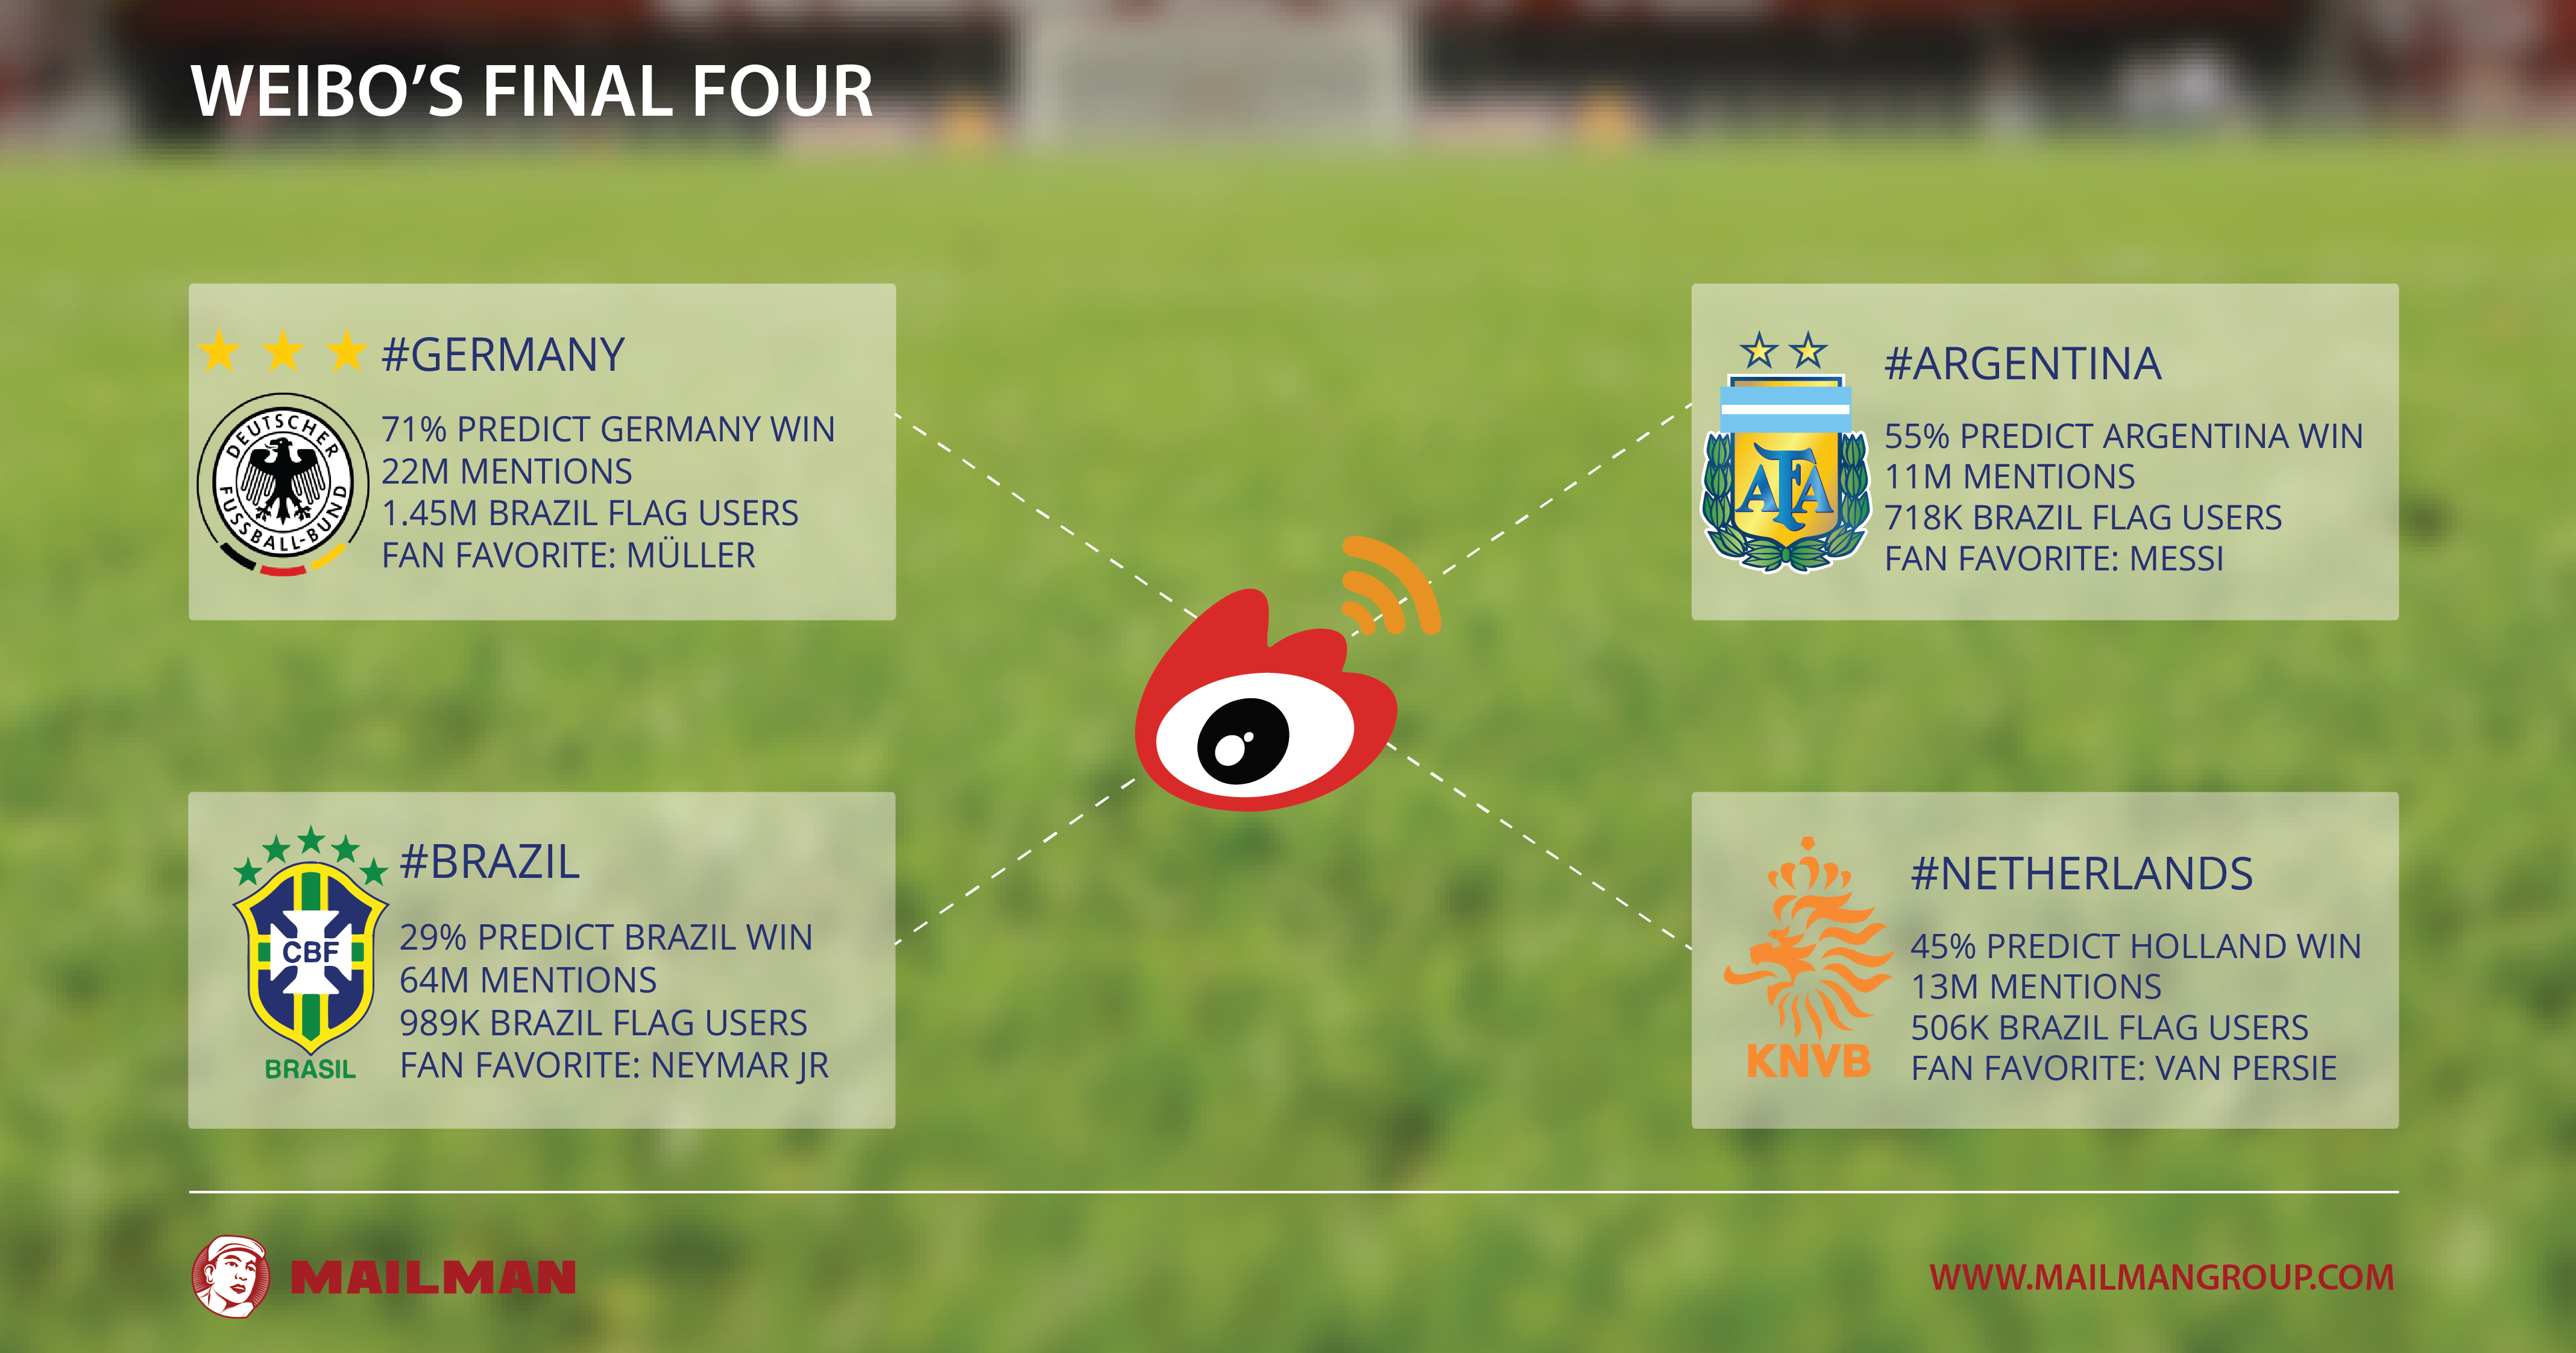 Weibo World Cup final four infographic - who are Chinese fans backing?